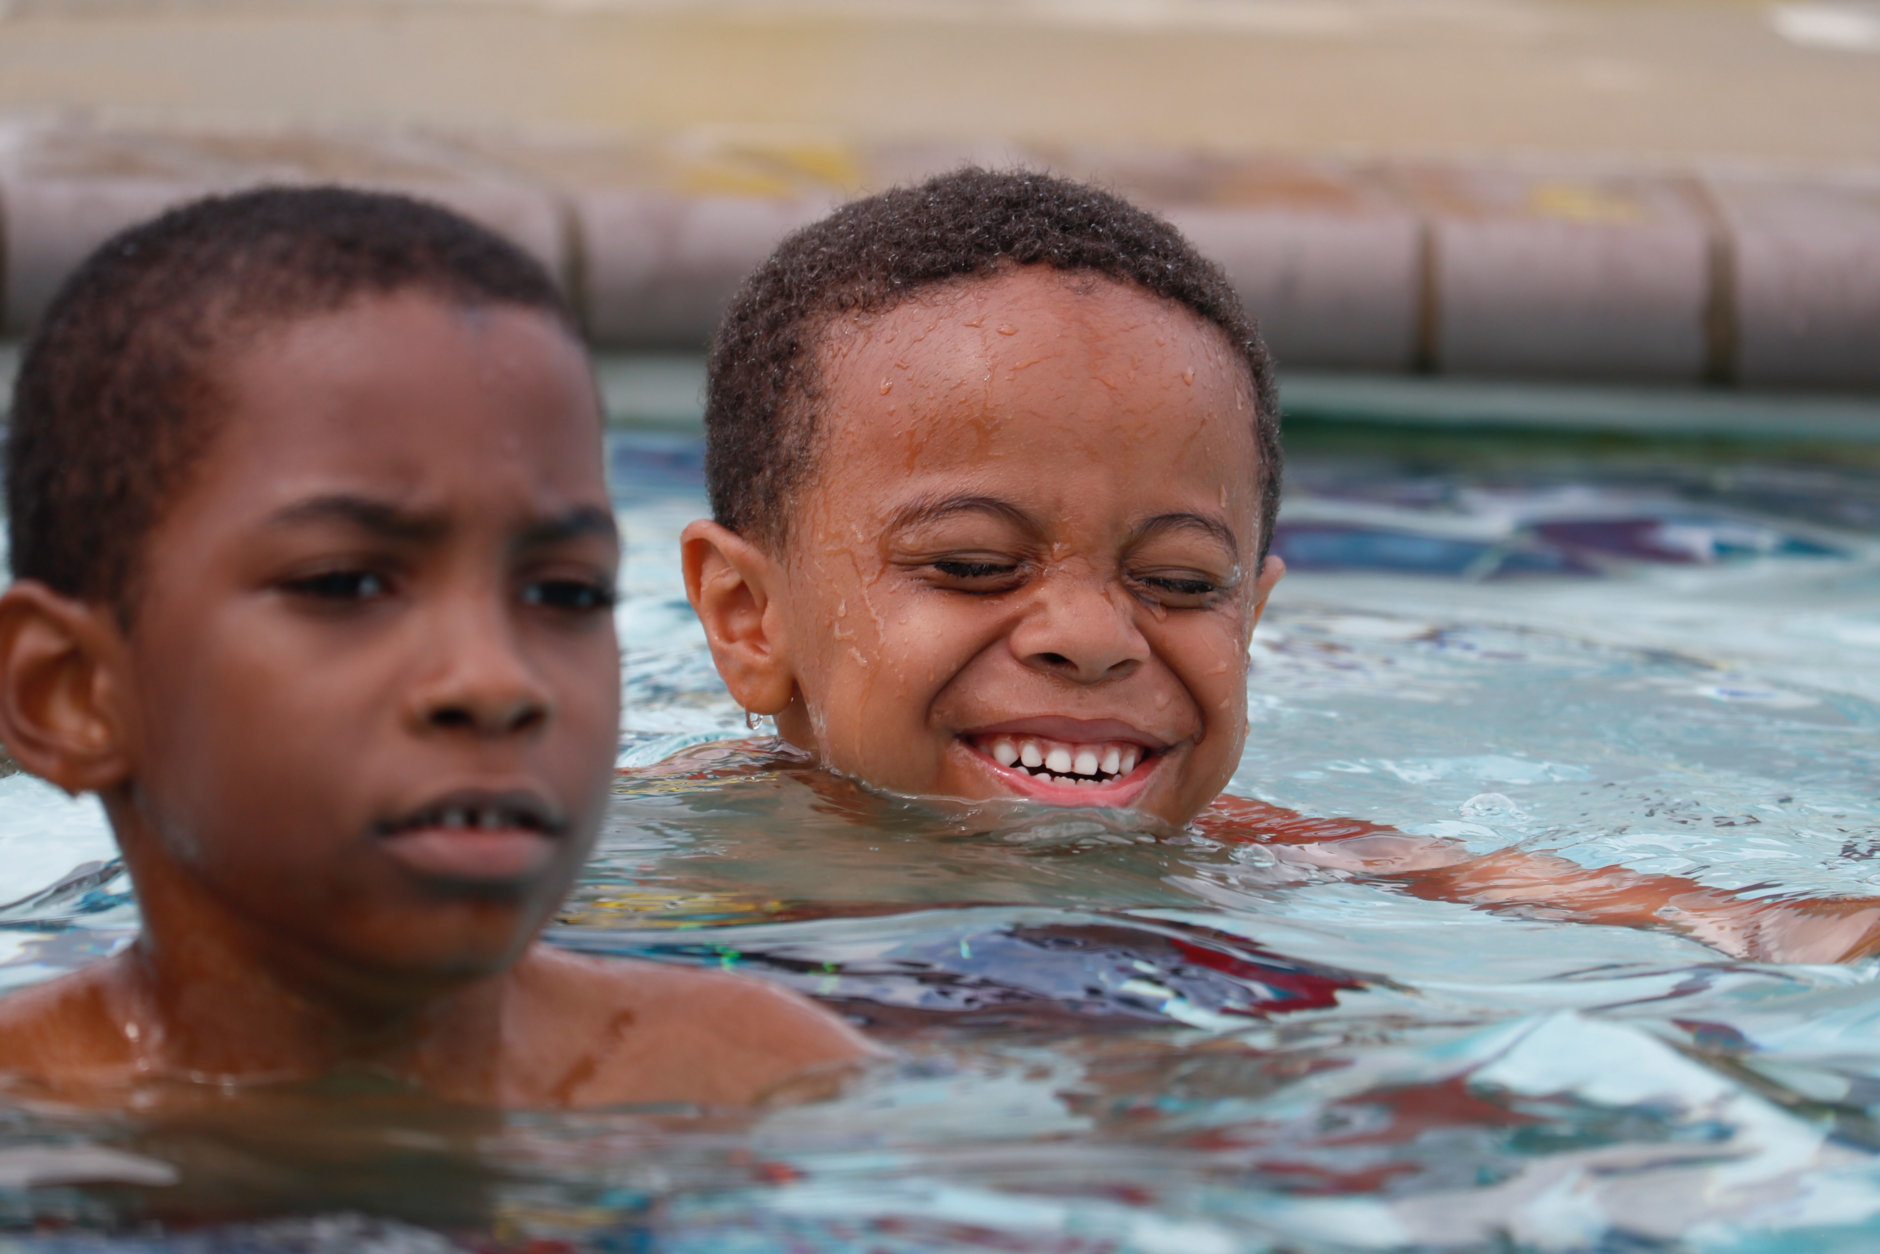 A group of boys surprised themselves, bobbing their faces into the water, popping up for air and bursting into smiles and laughter as they mastered their new skill. (WTOP/Kate Ryan)